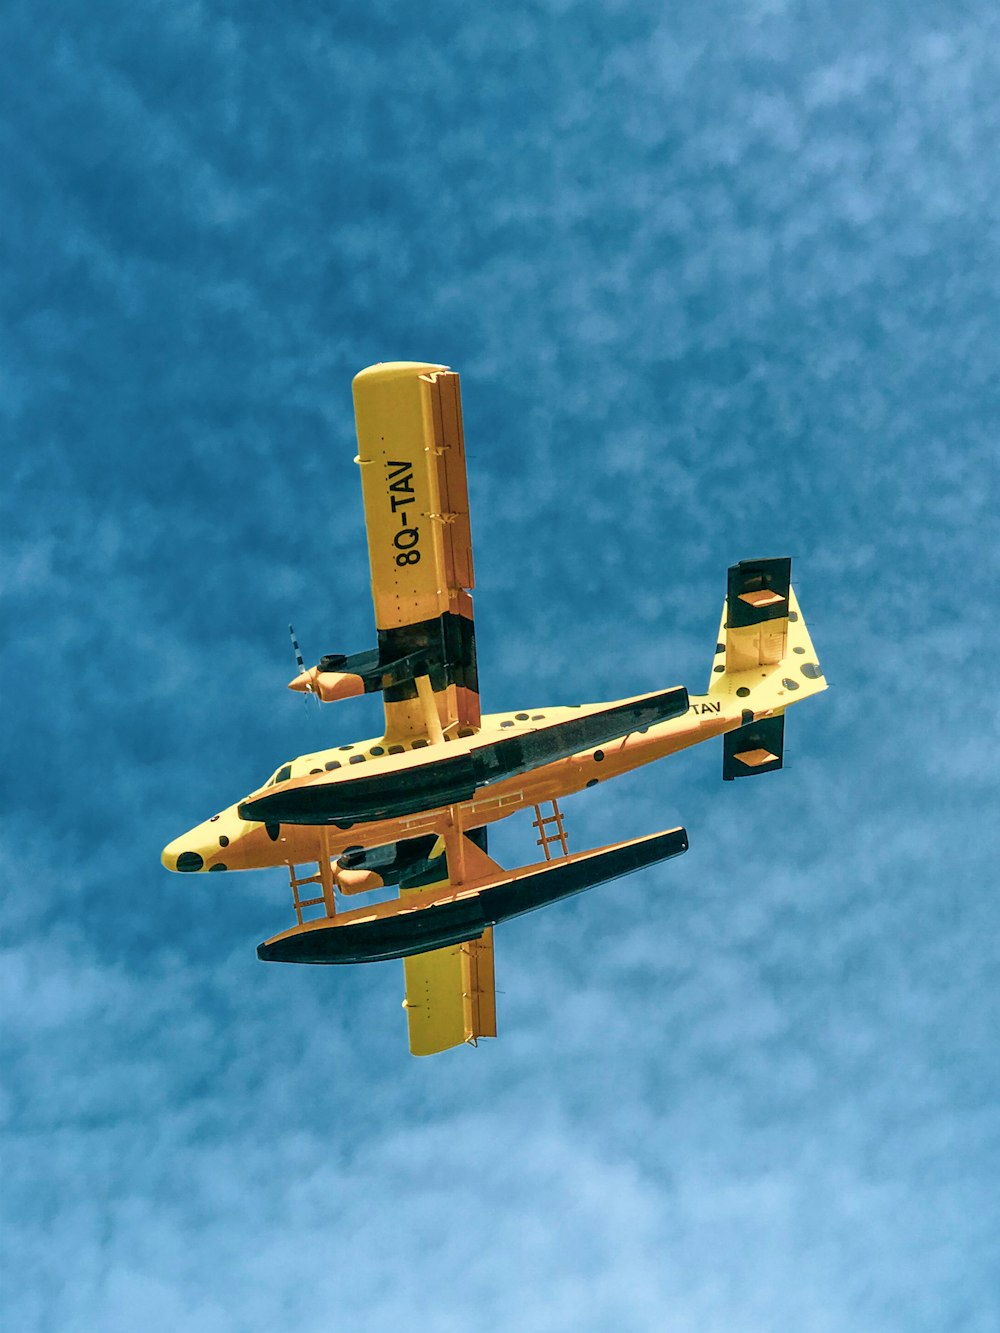 a small yellow airplane flying through a blue sky